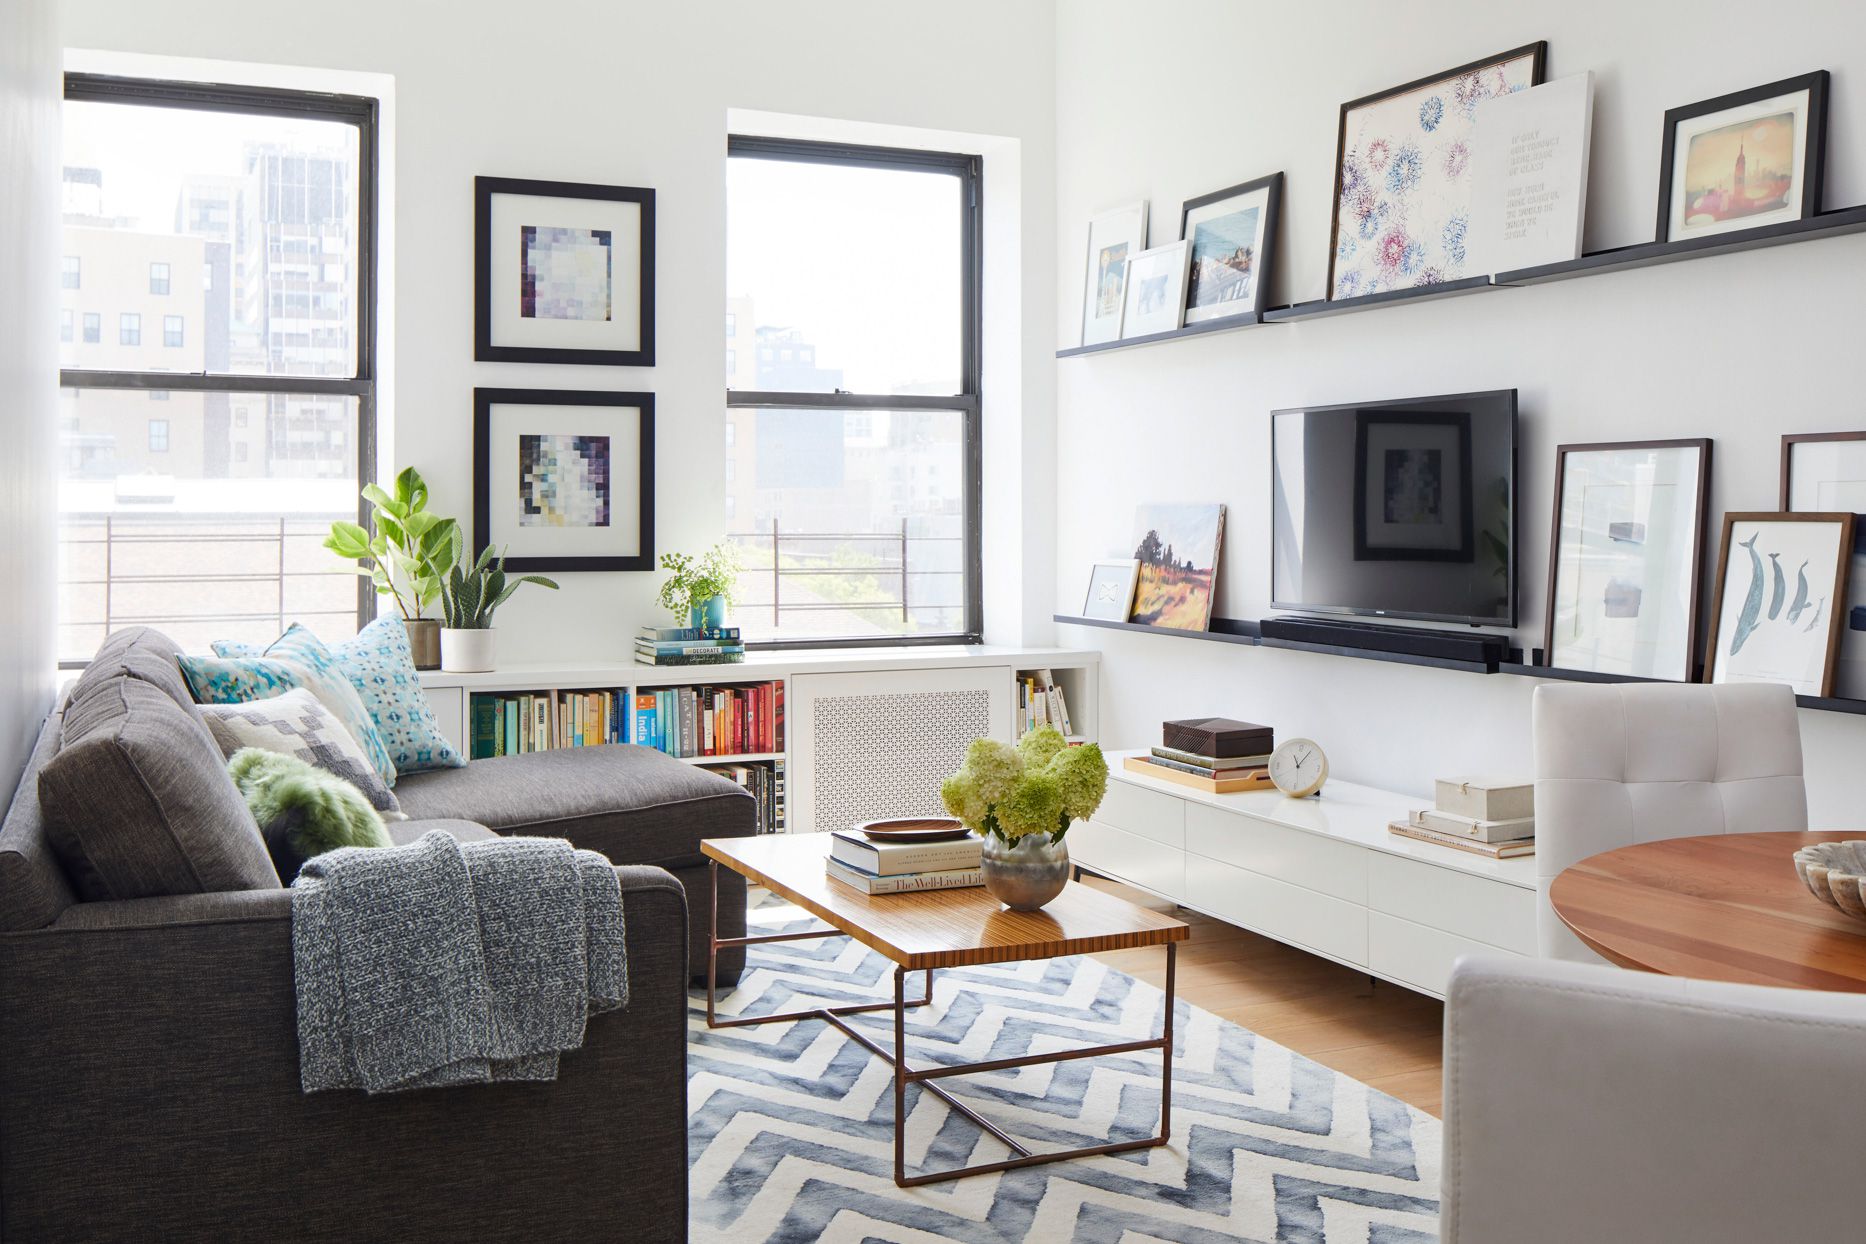 How do You Maximize Small Living Spaces